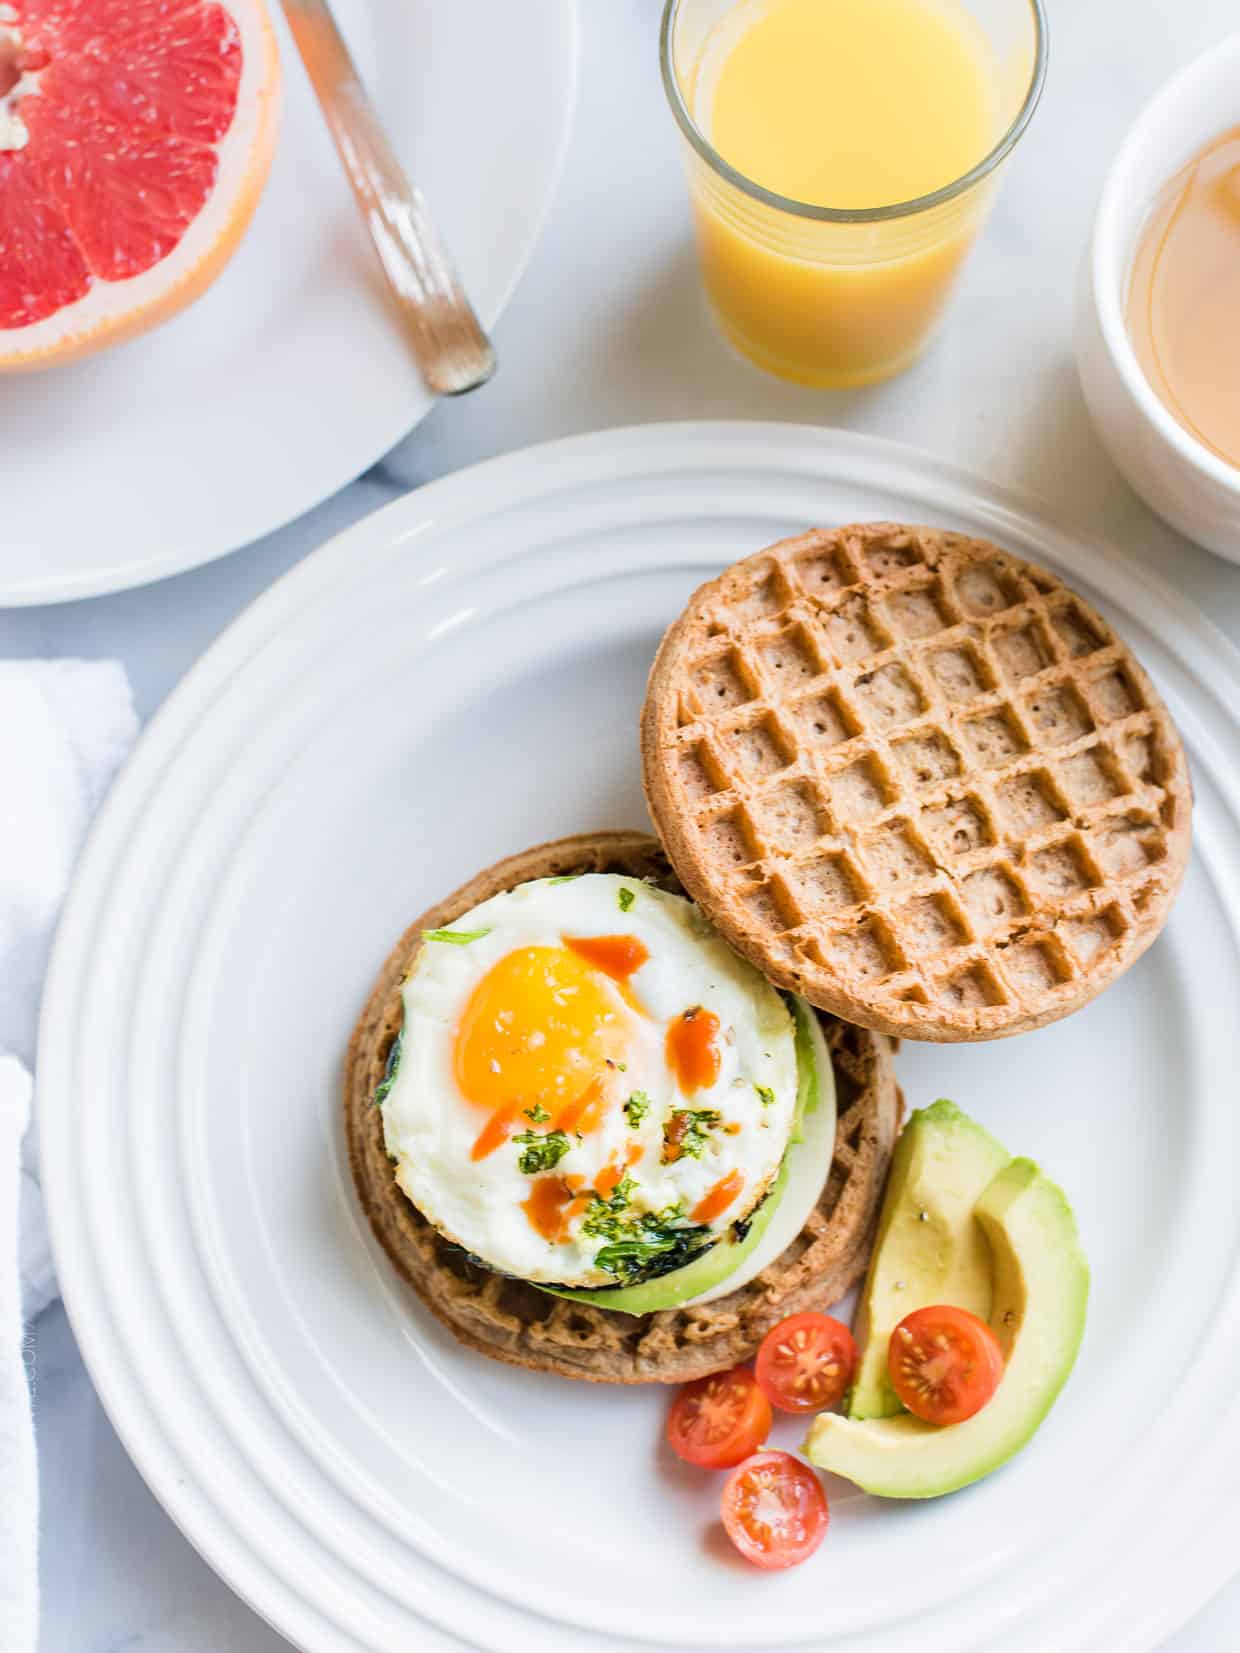 Two wholegrain waffles, one topped with an over easy egg, spinach, avocado, and hot sauce.